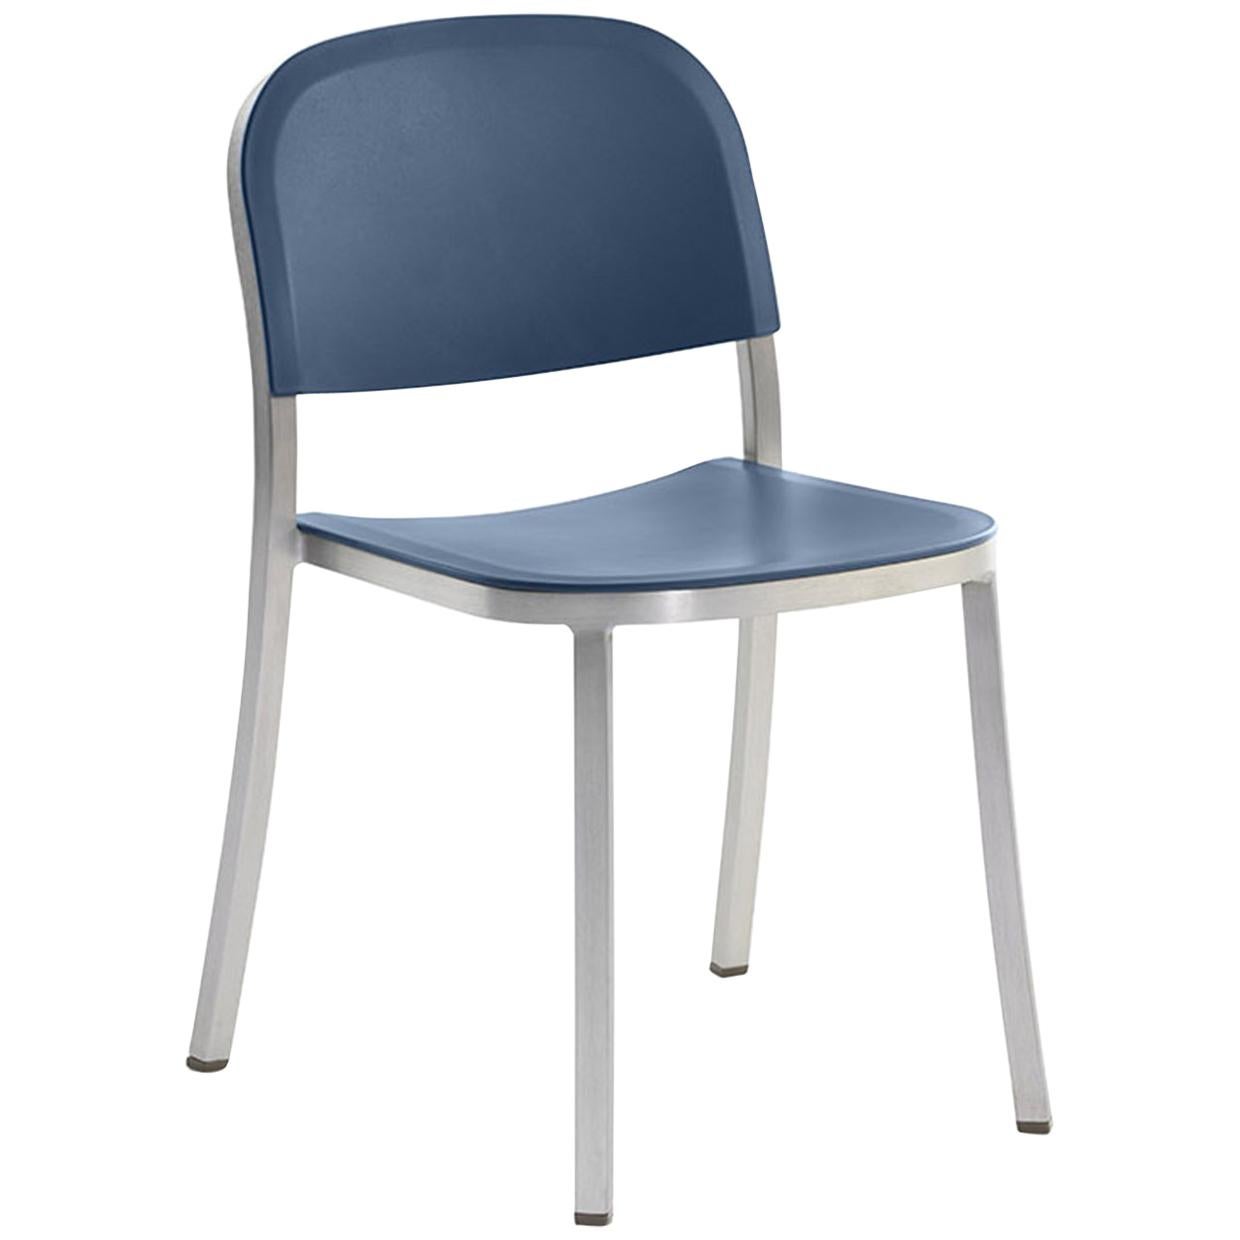 Emeco Stacking Chair in Brushed Aluminum & Blue by Jasper Morrison For Sale